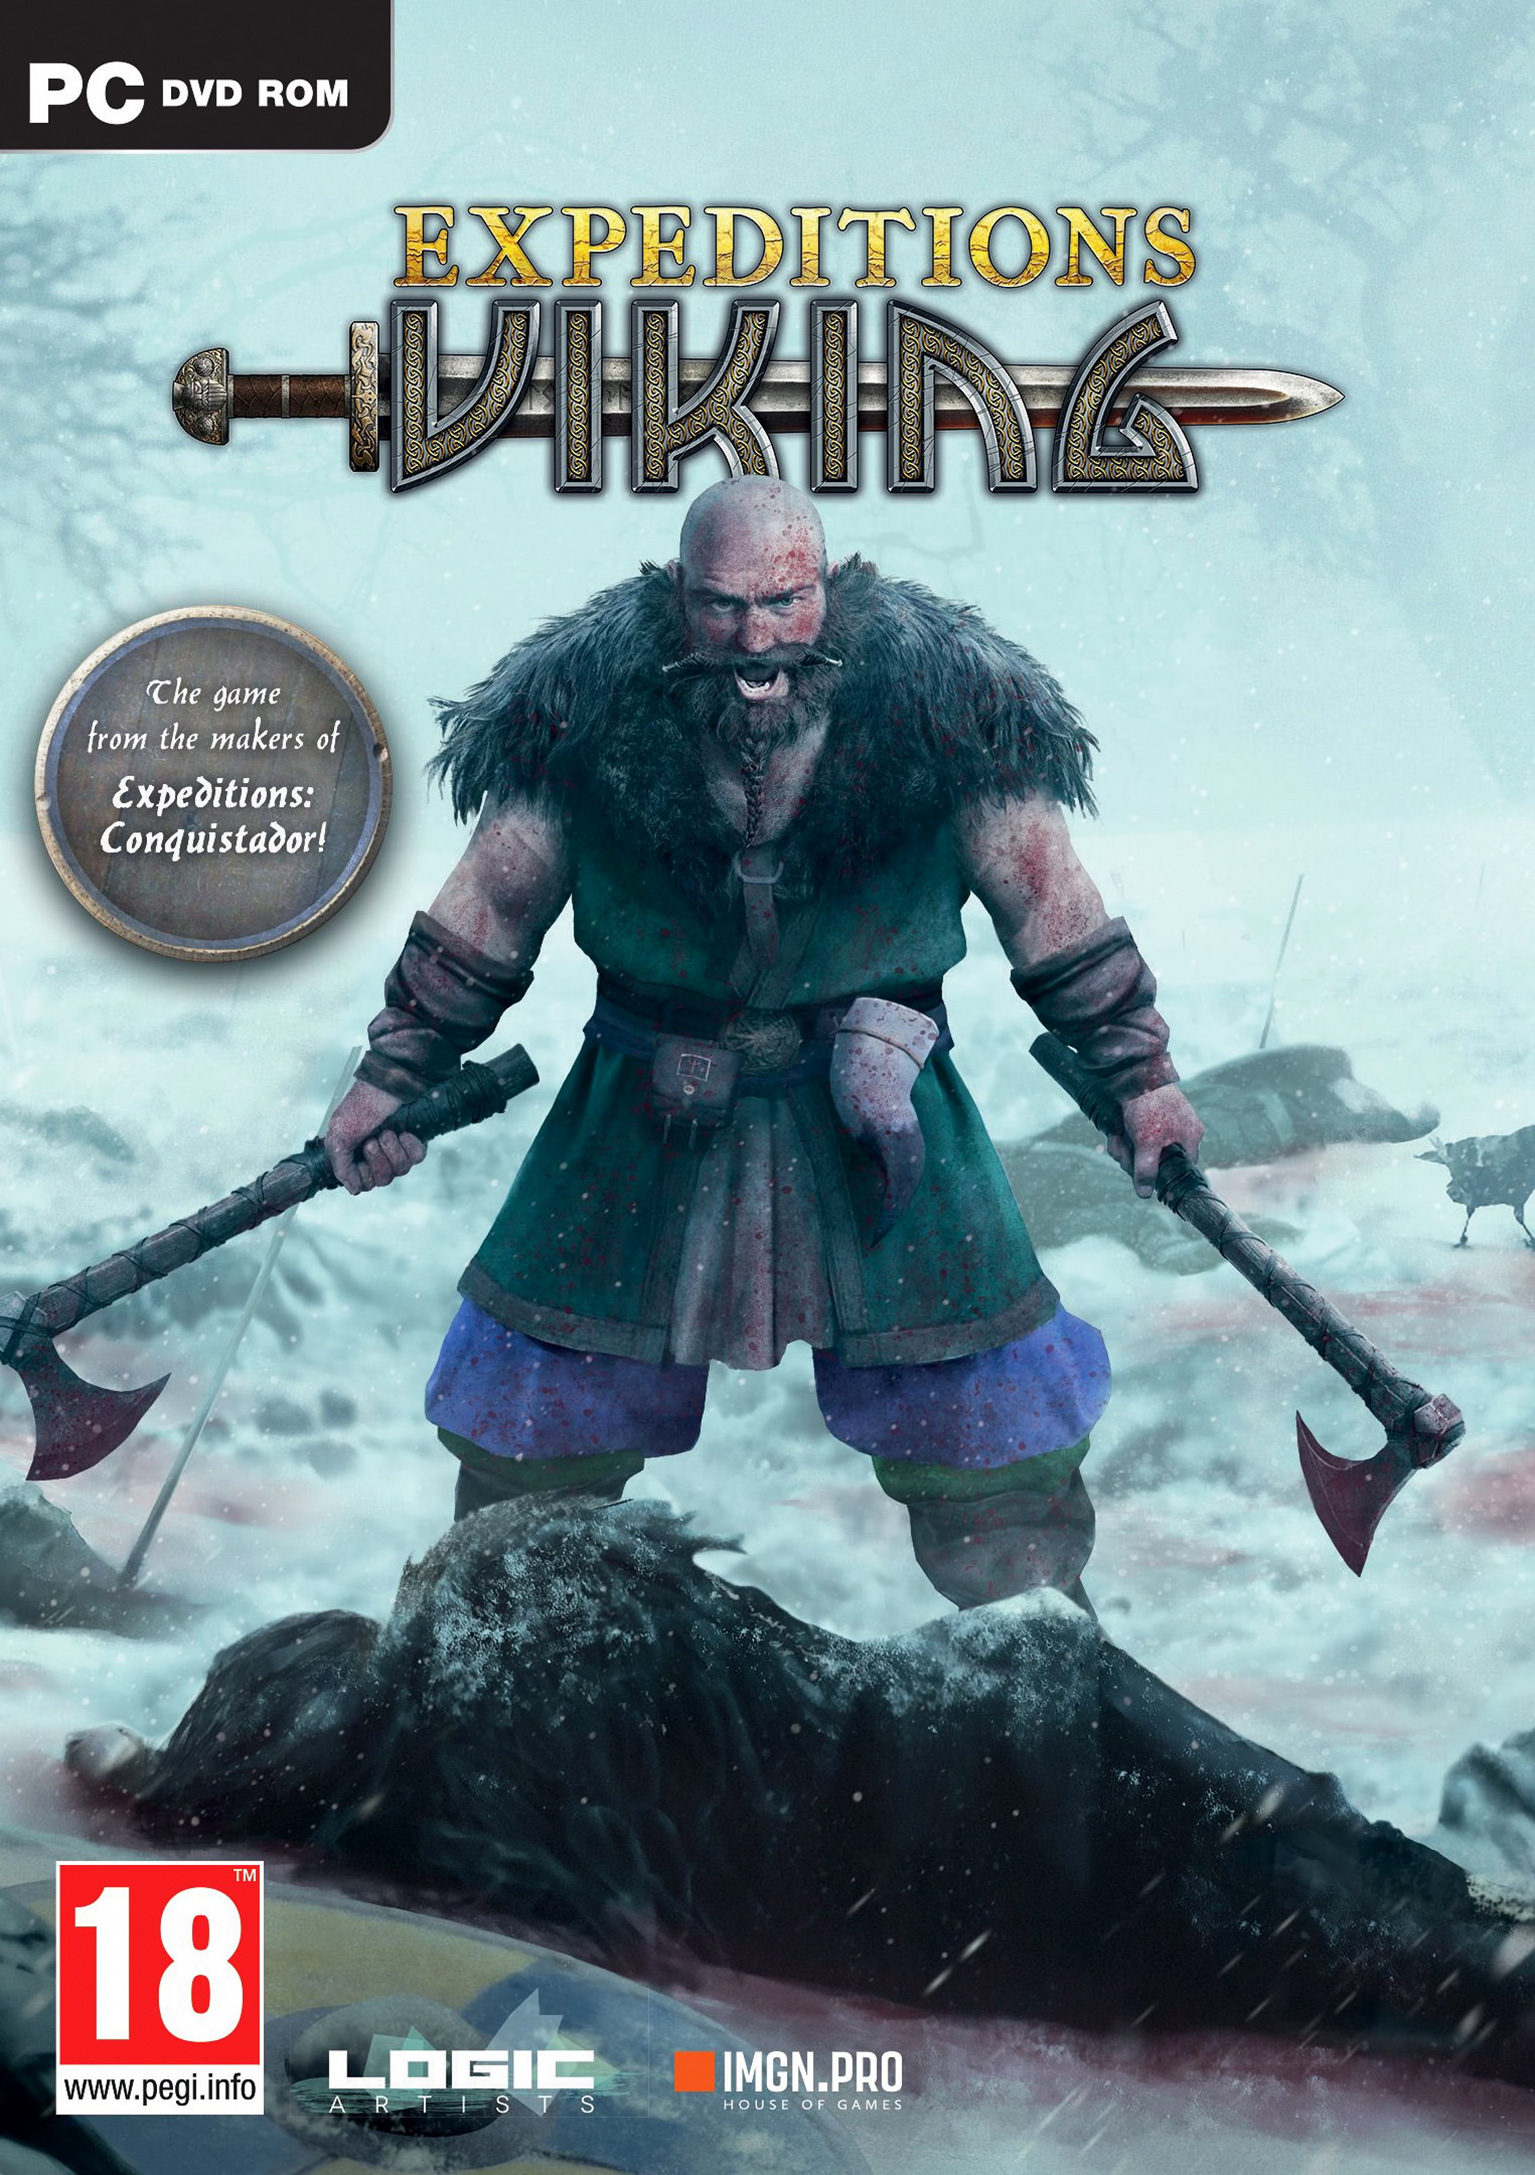 Expeditions: Viking - pedn DVD obal